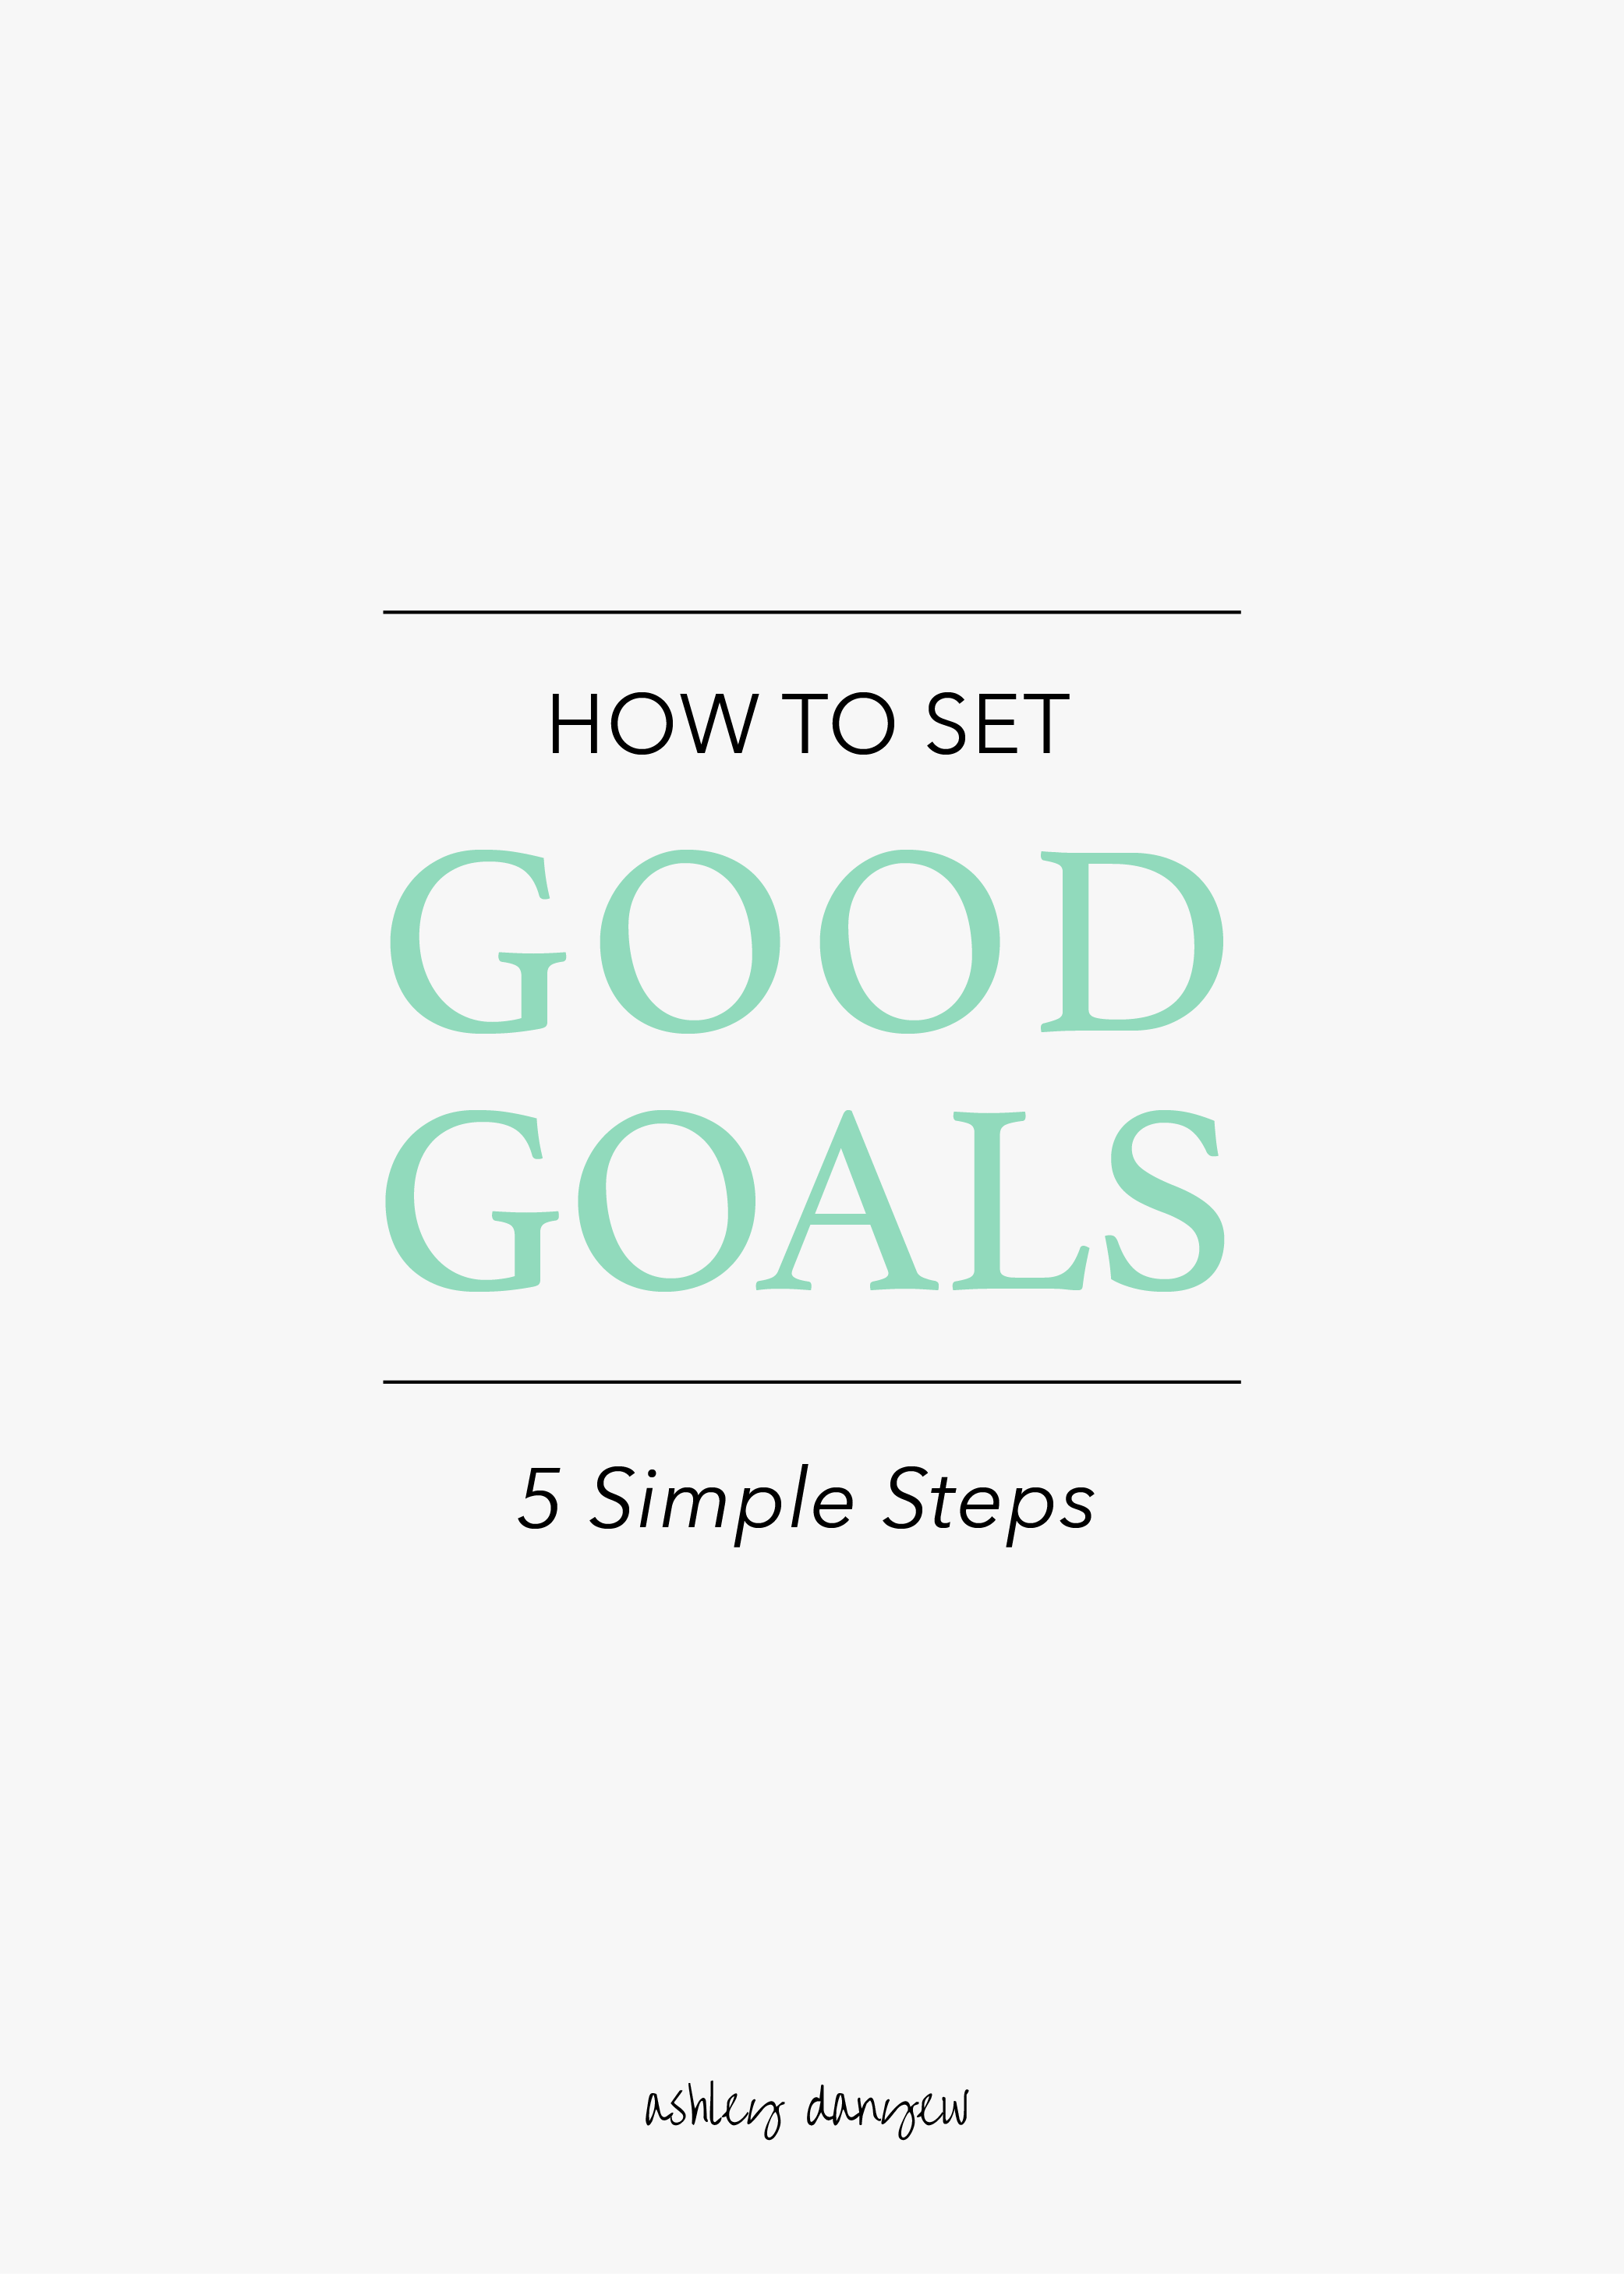 Copy of How to Set Good Goals: 5 Simple Steps